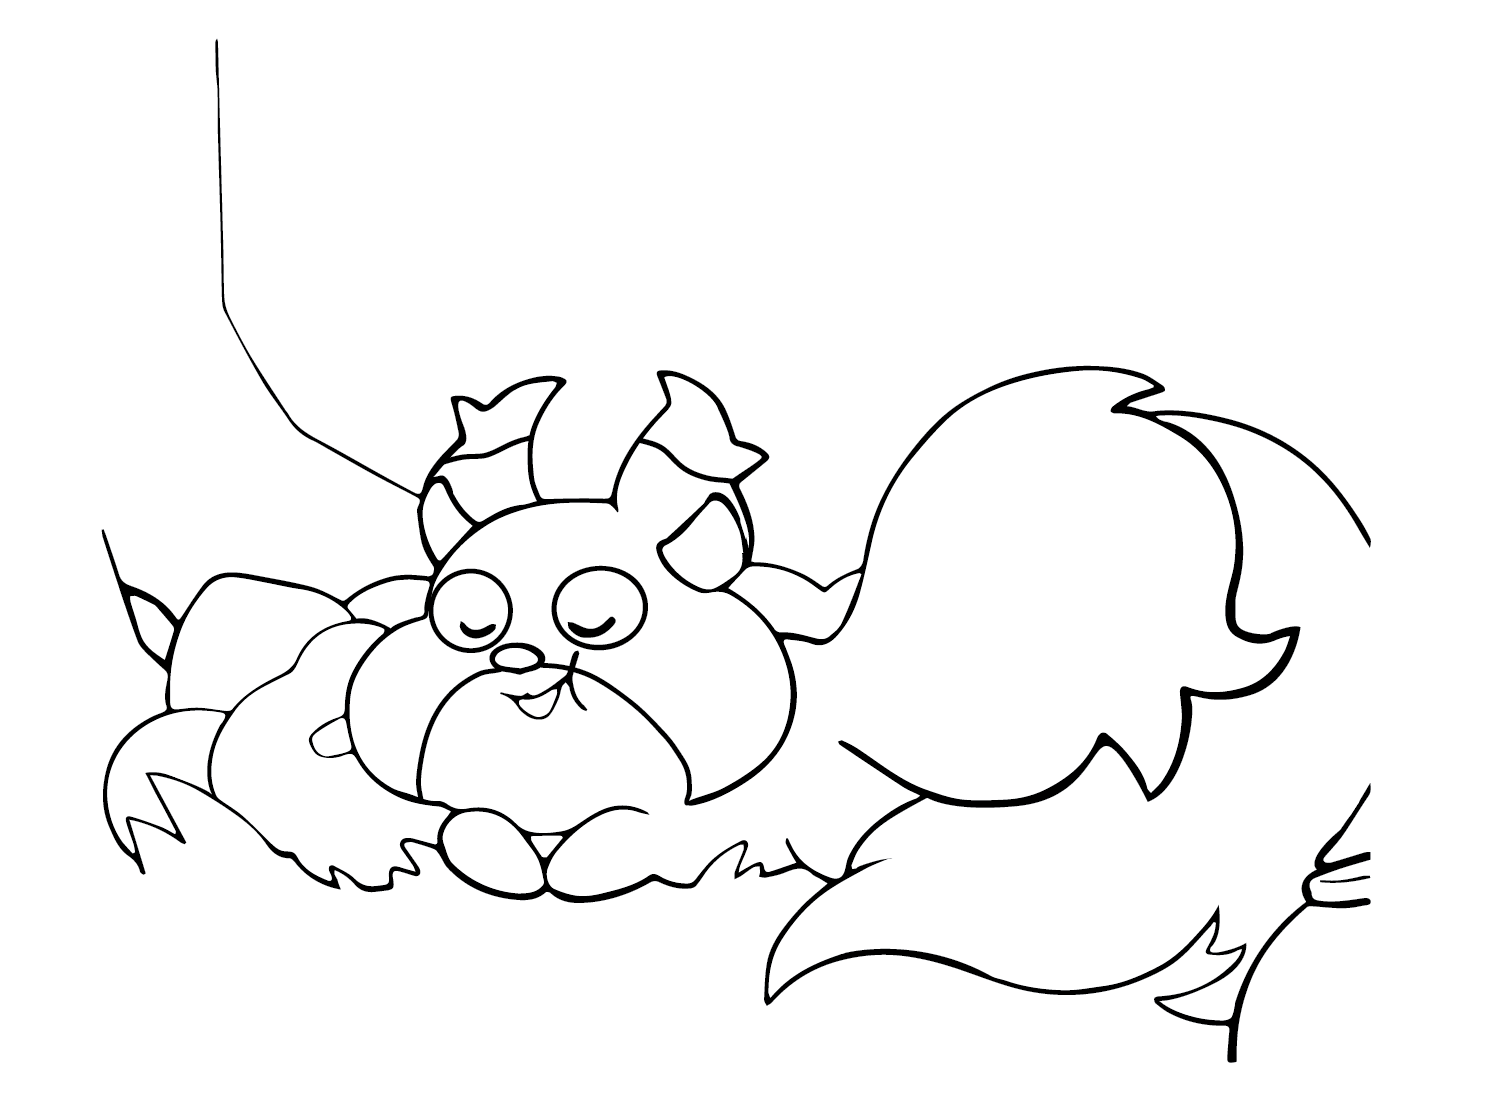 The Pokemon Skwovet Coloring Page